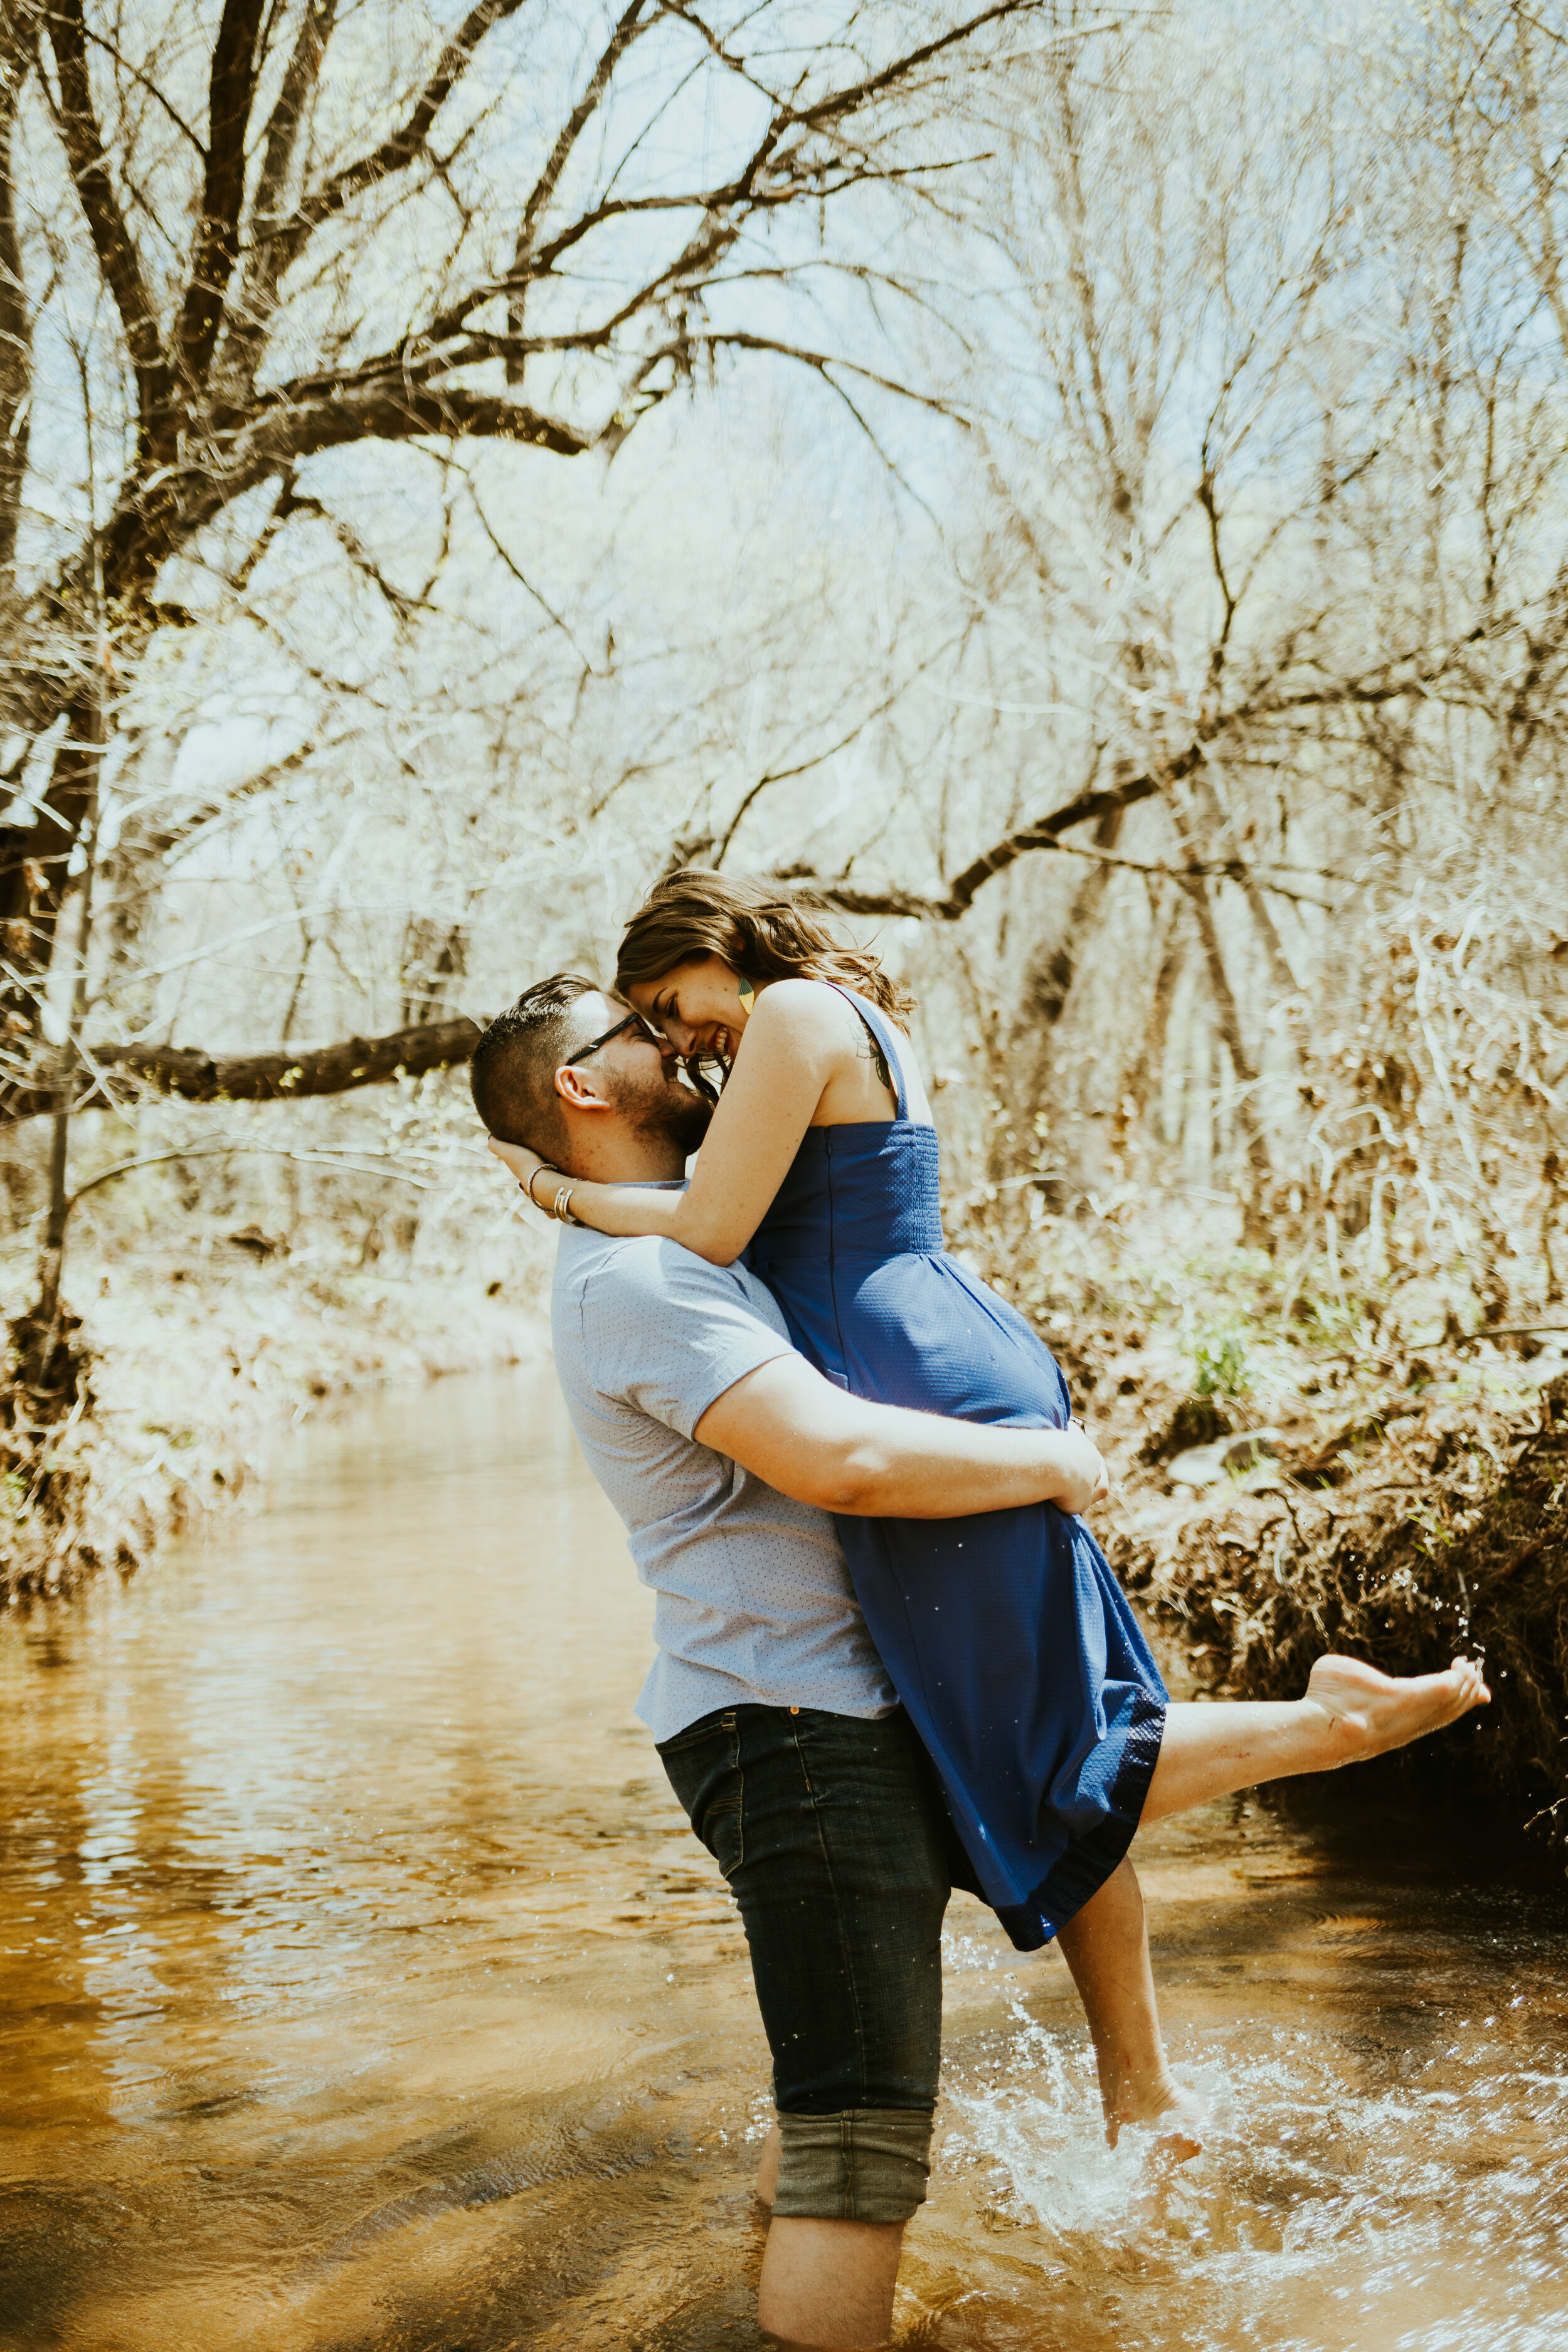 red rock crossing sedona arizona cathedral rock crescent moon ranch couple photos engagement photo outfit inspiration couple posing ideas midday photos-29.jpg